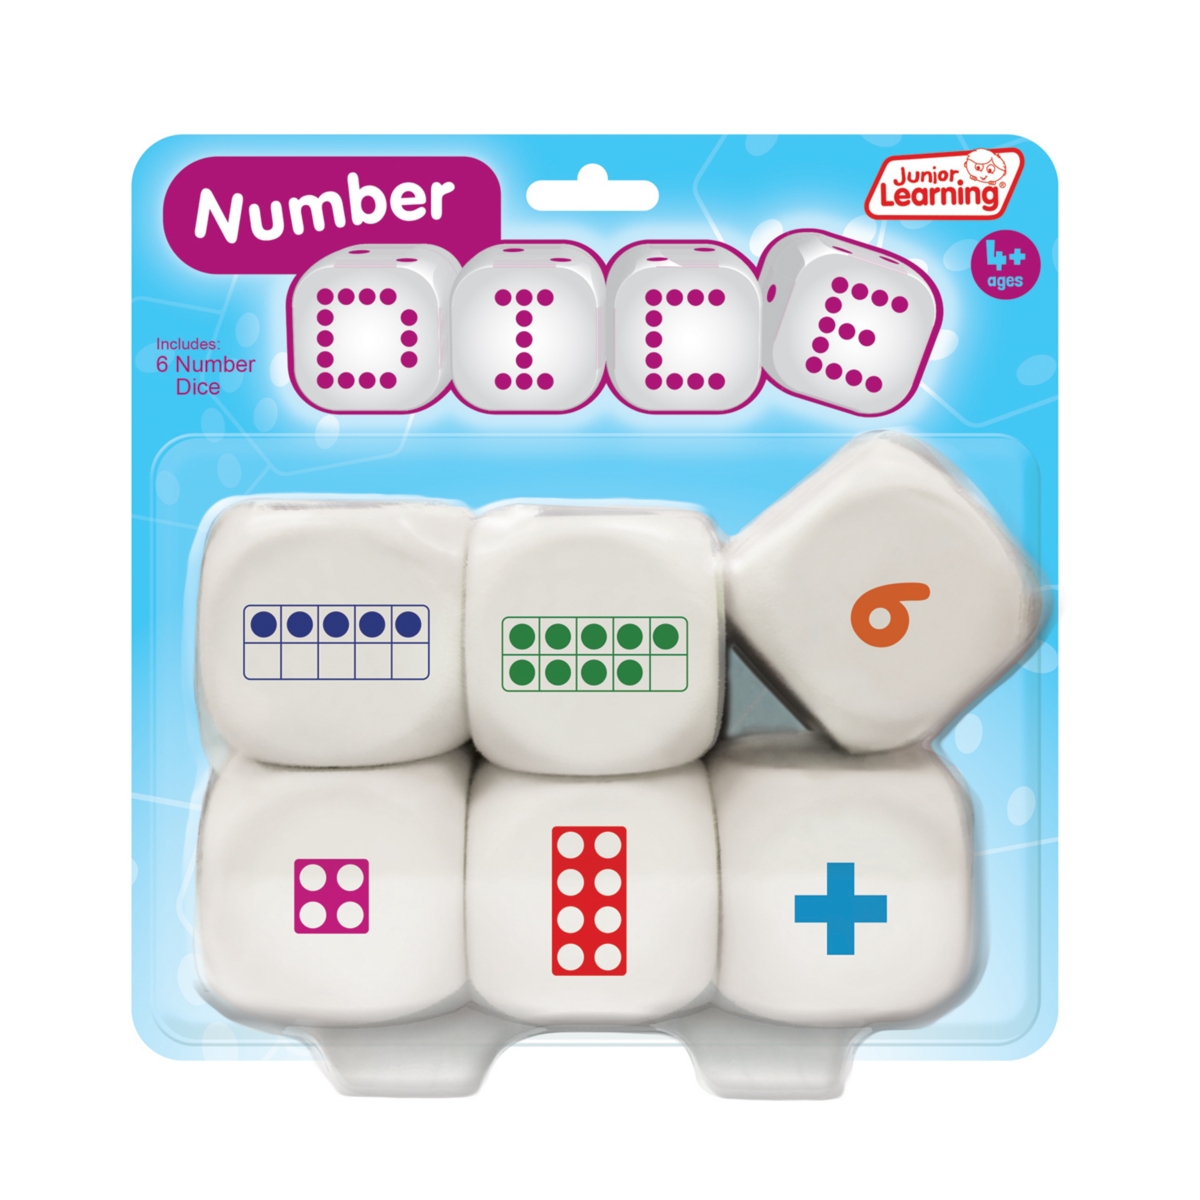 Junior Learning Kids' Number Dice Educational Learning Game In Multi